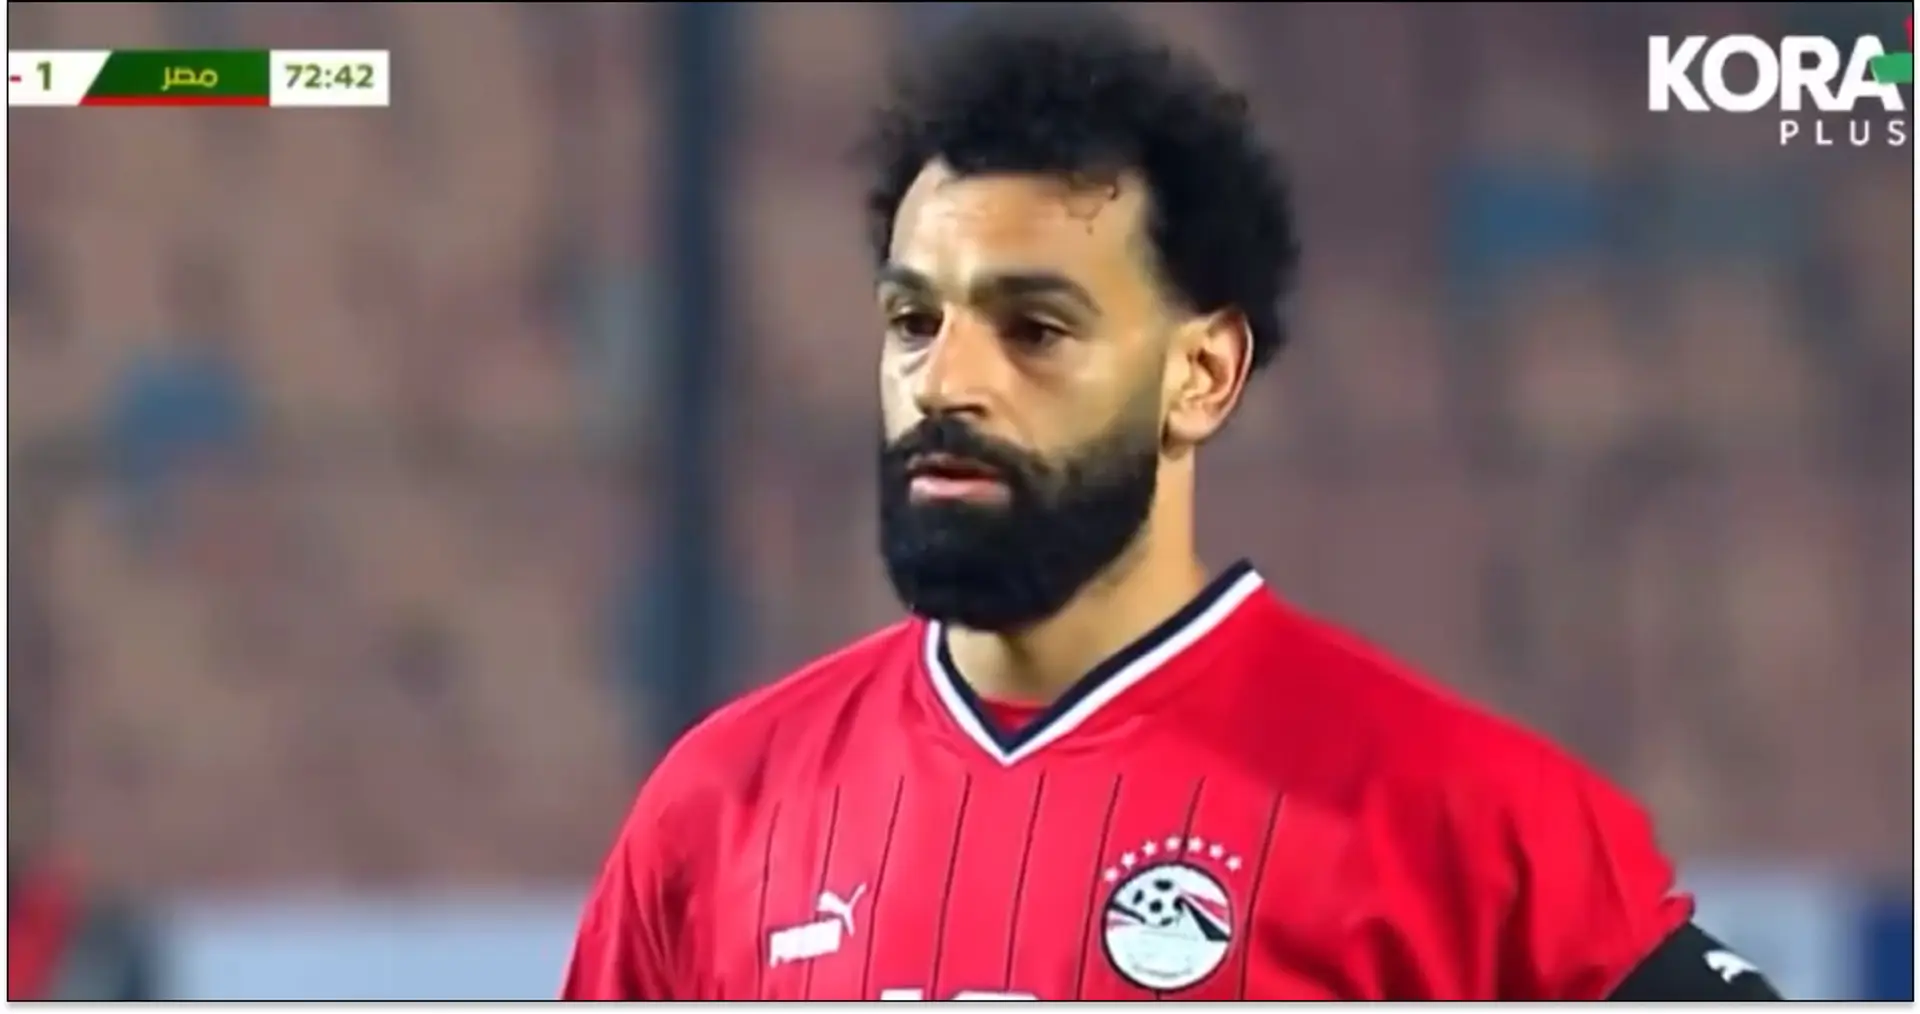 'I don't think it was right': Egypt head coach criticises Liverpool after Salah injury